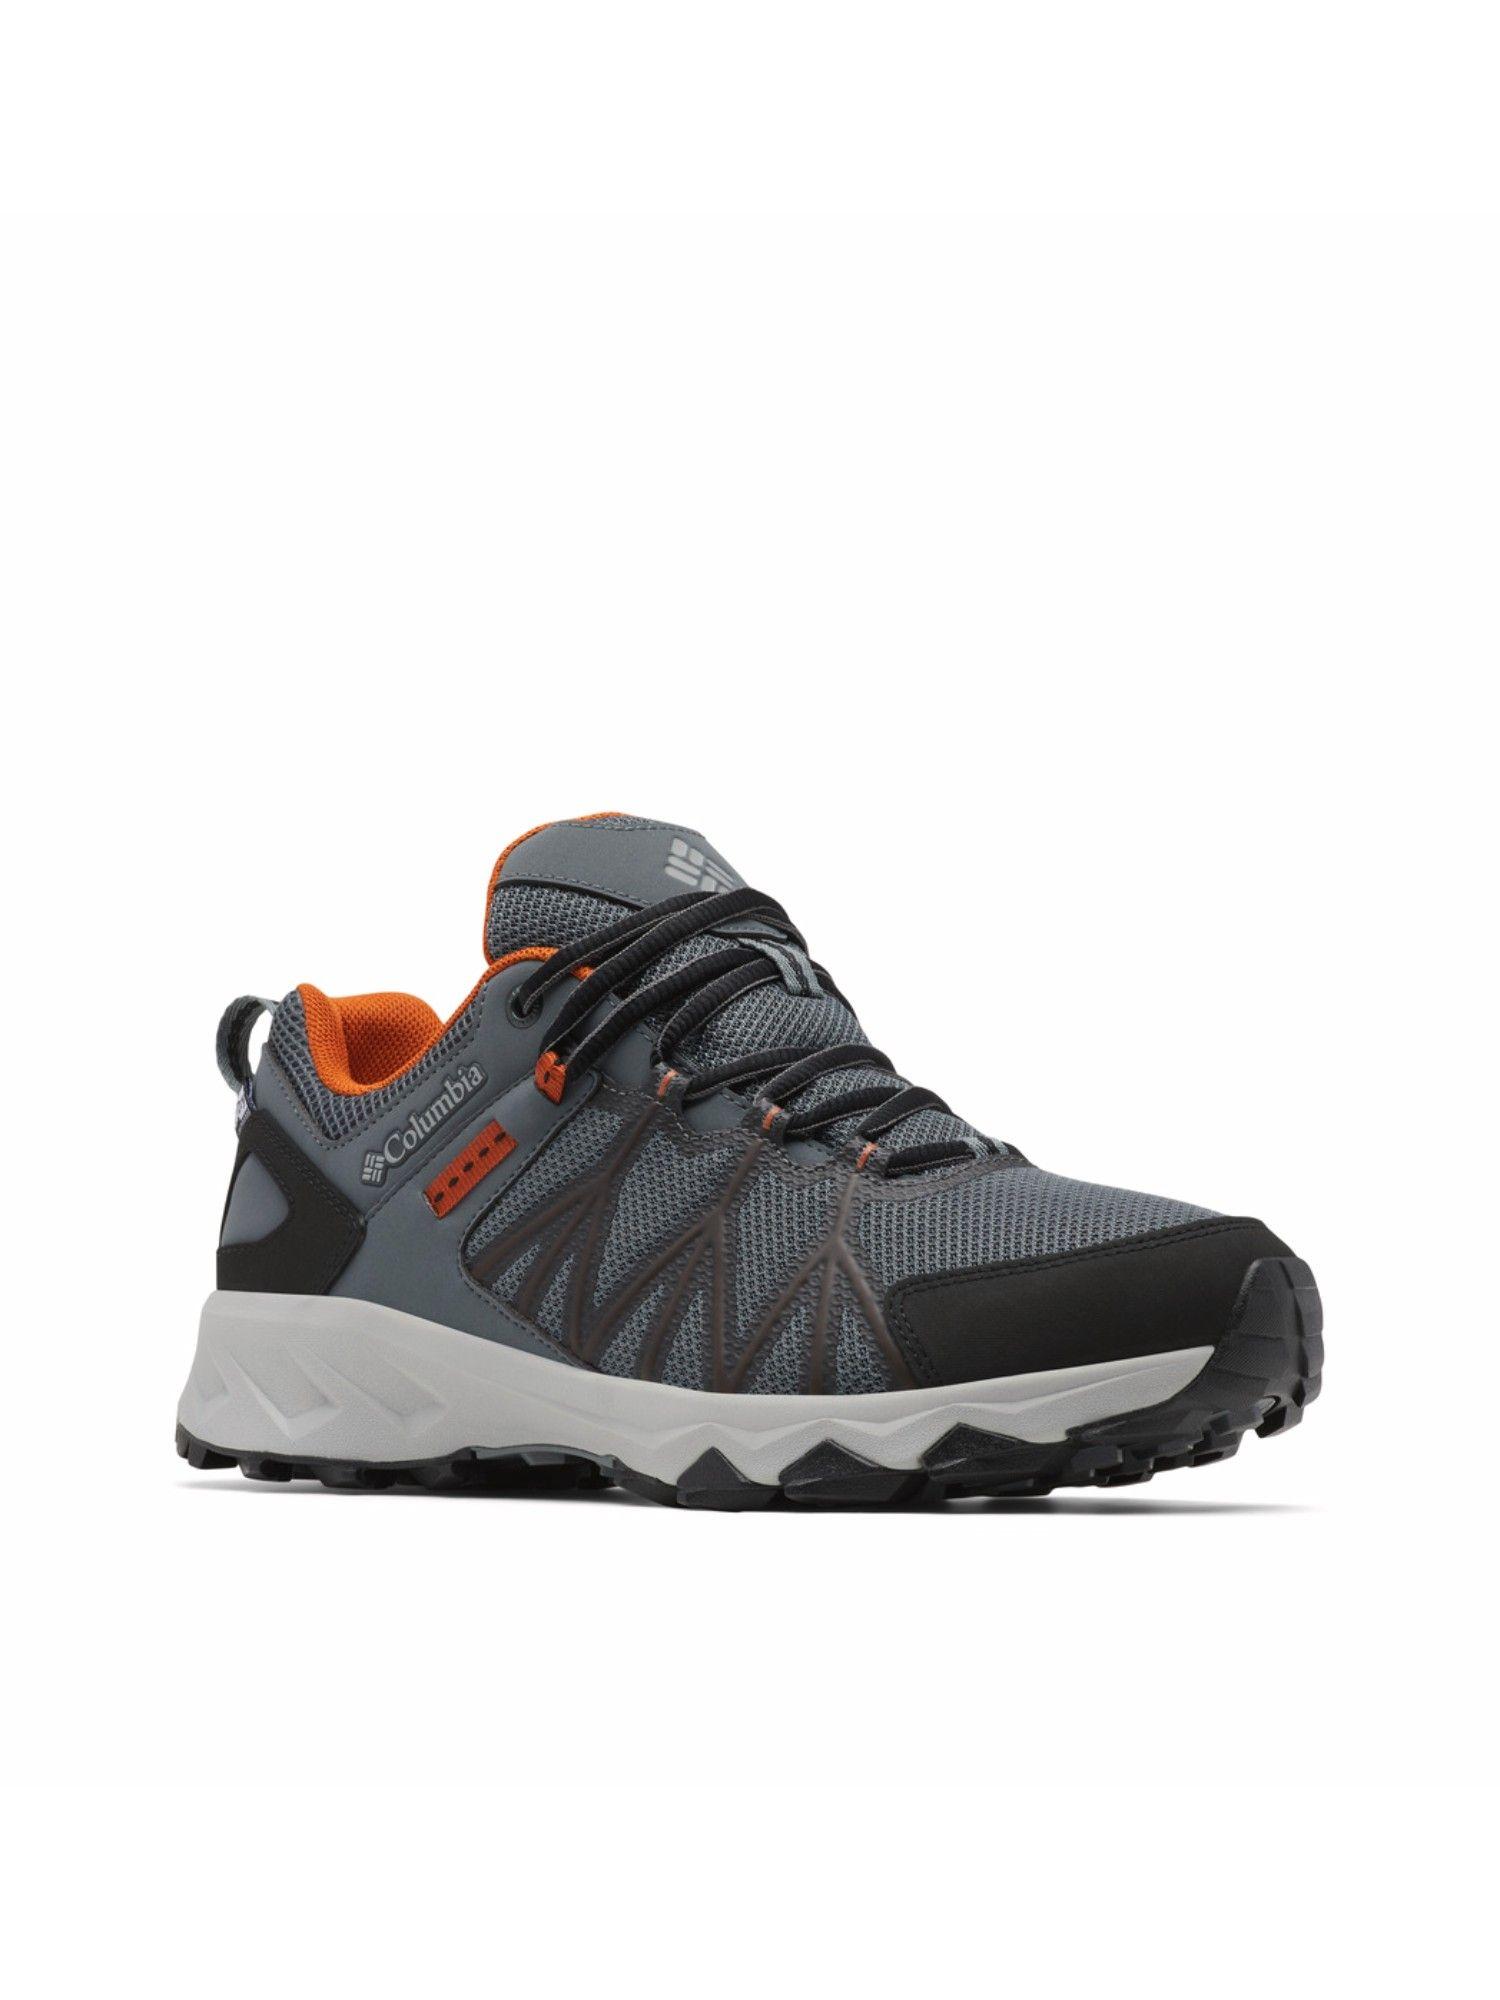 mens grey colour hiking and trail peakfreak ii outdry shoes